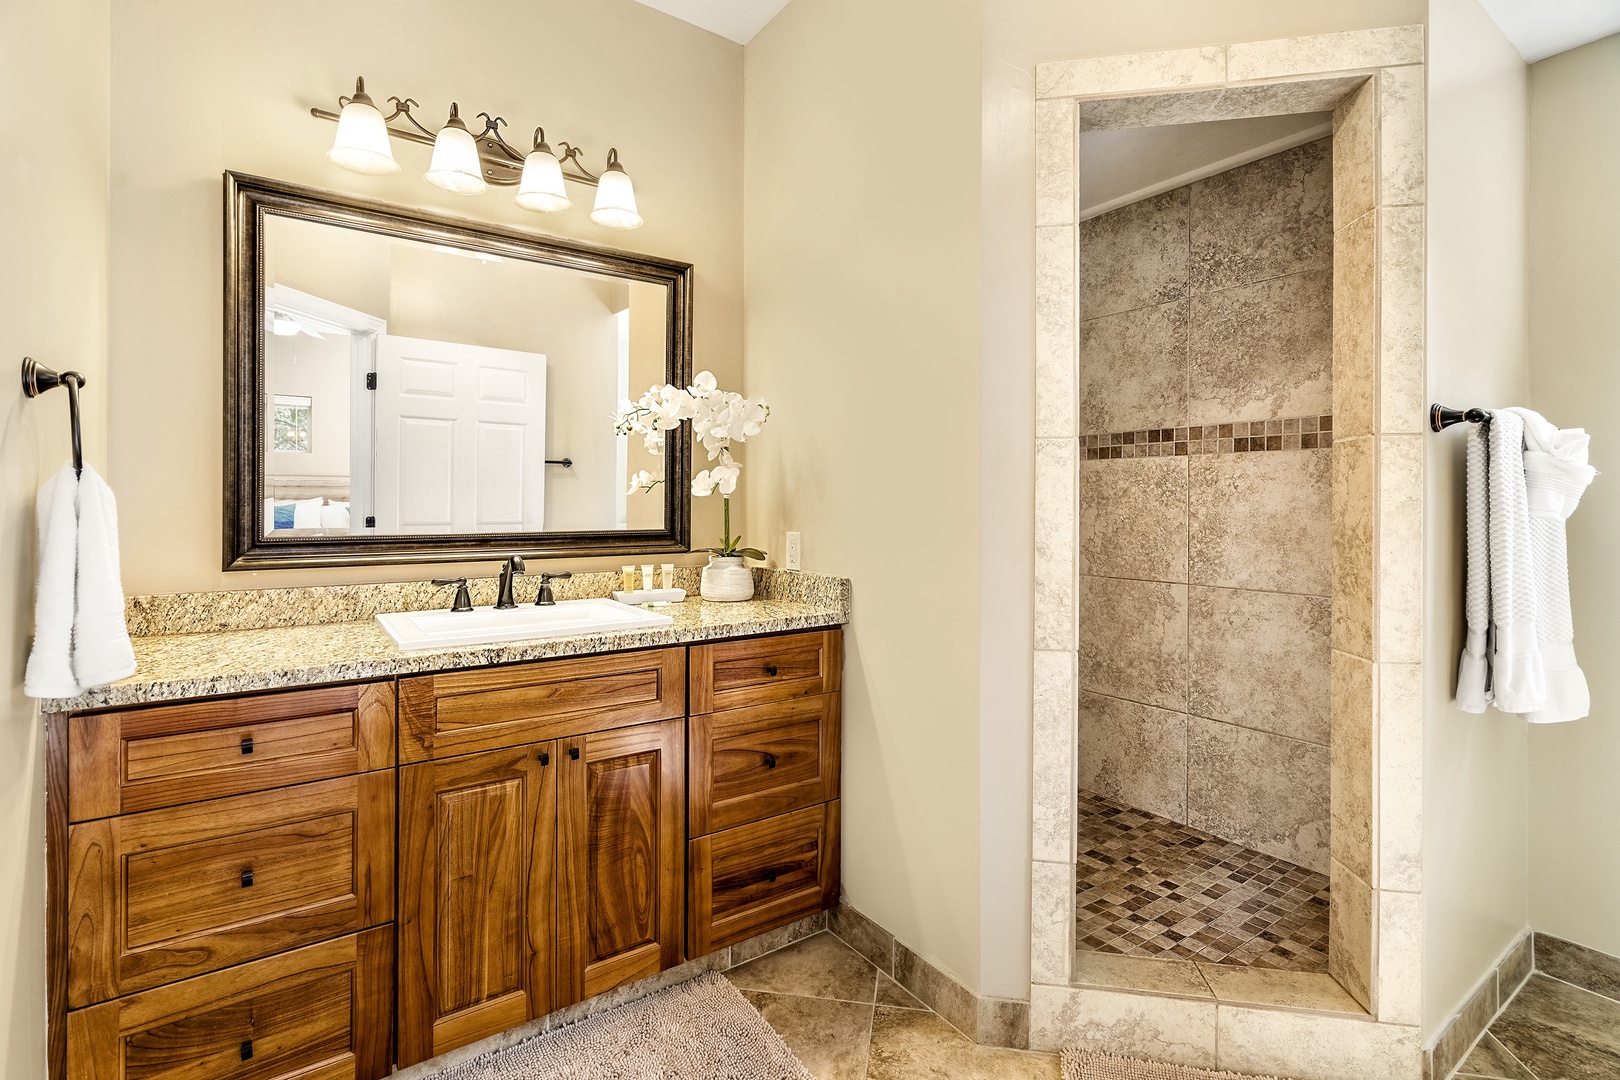 Kailua Kona Vacation Rentals, Lymans Bay Hale - Downstairs primary ensuite with walk in shower